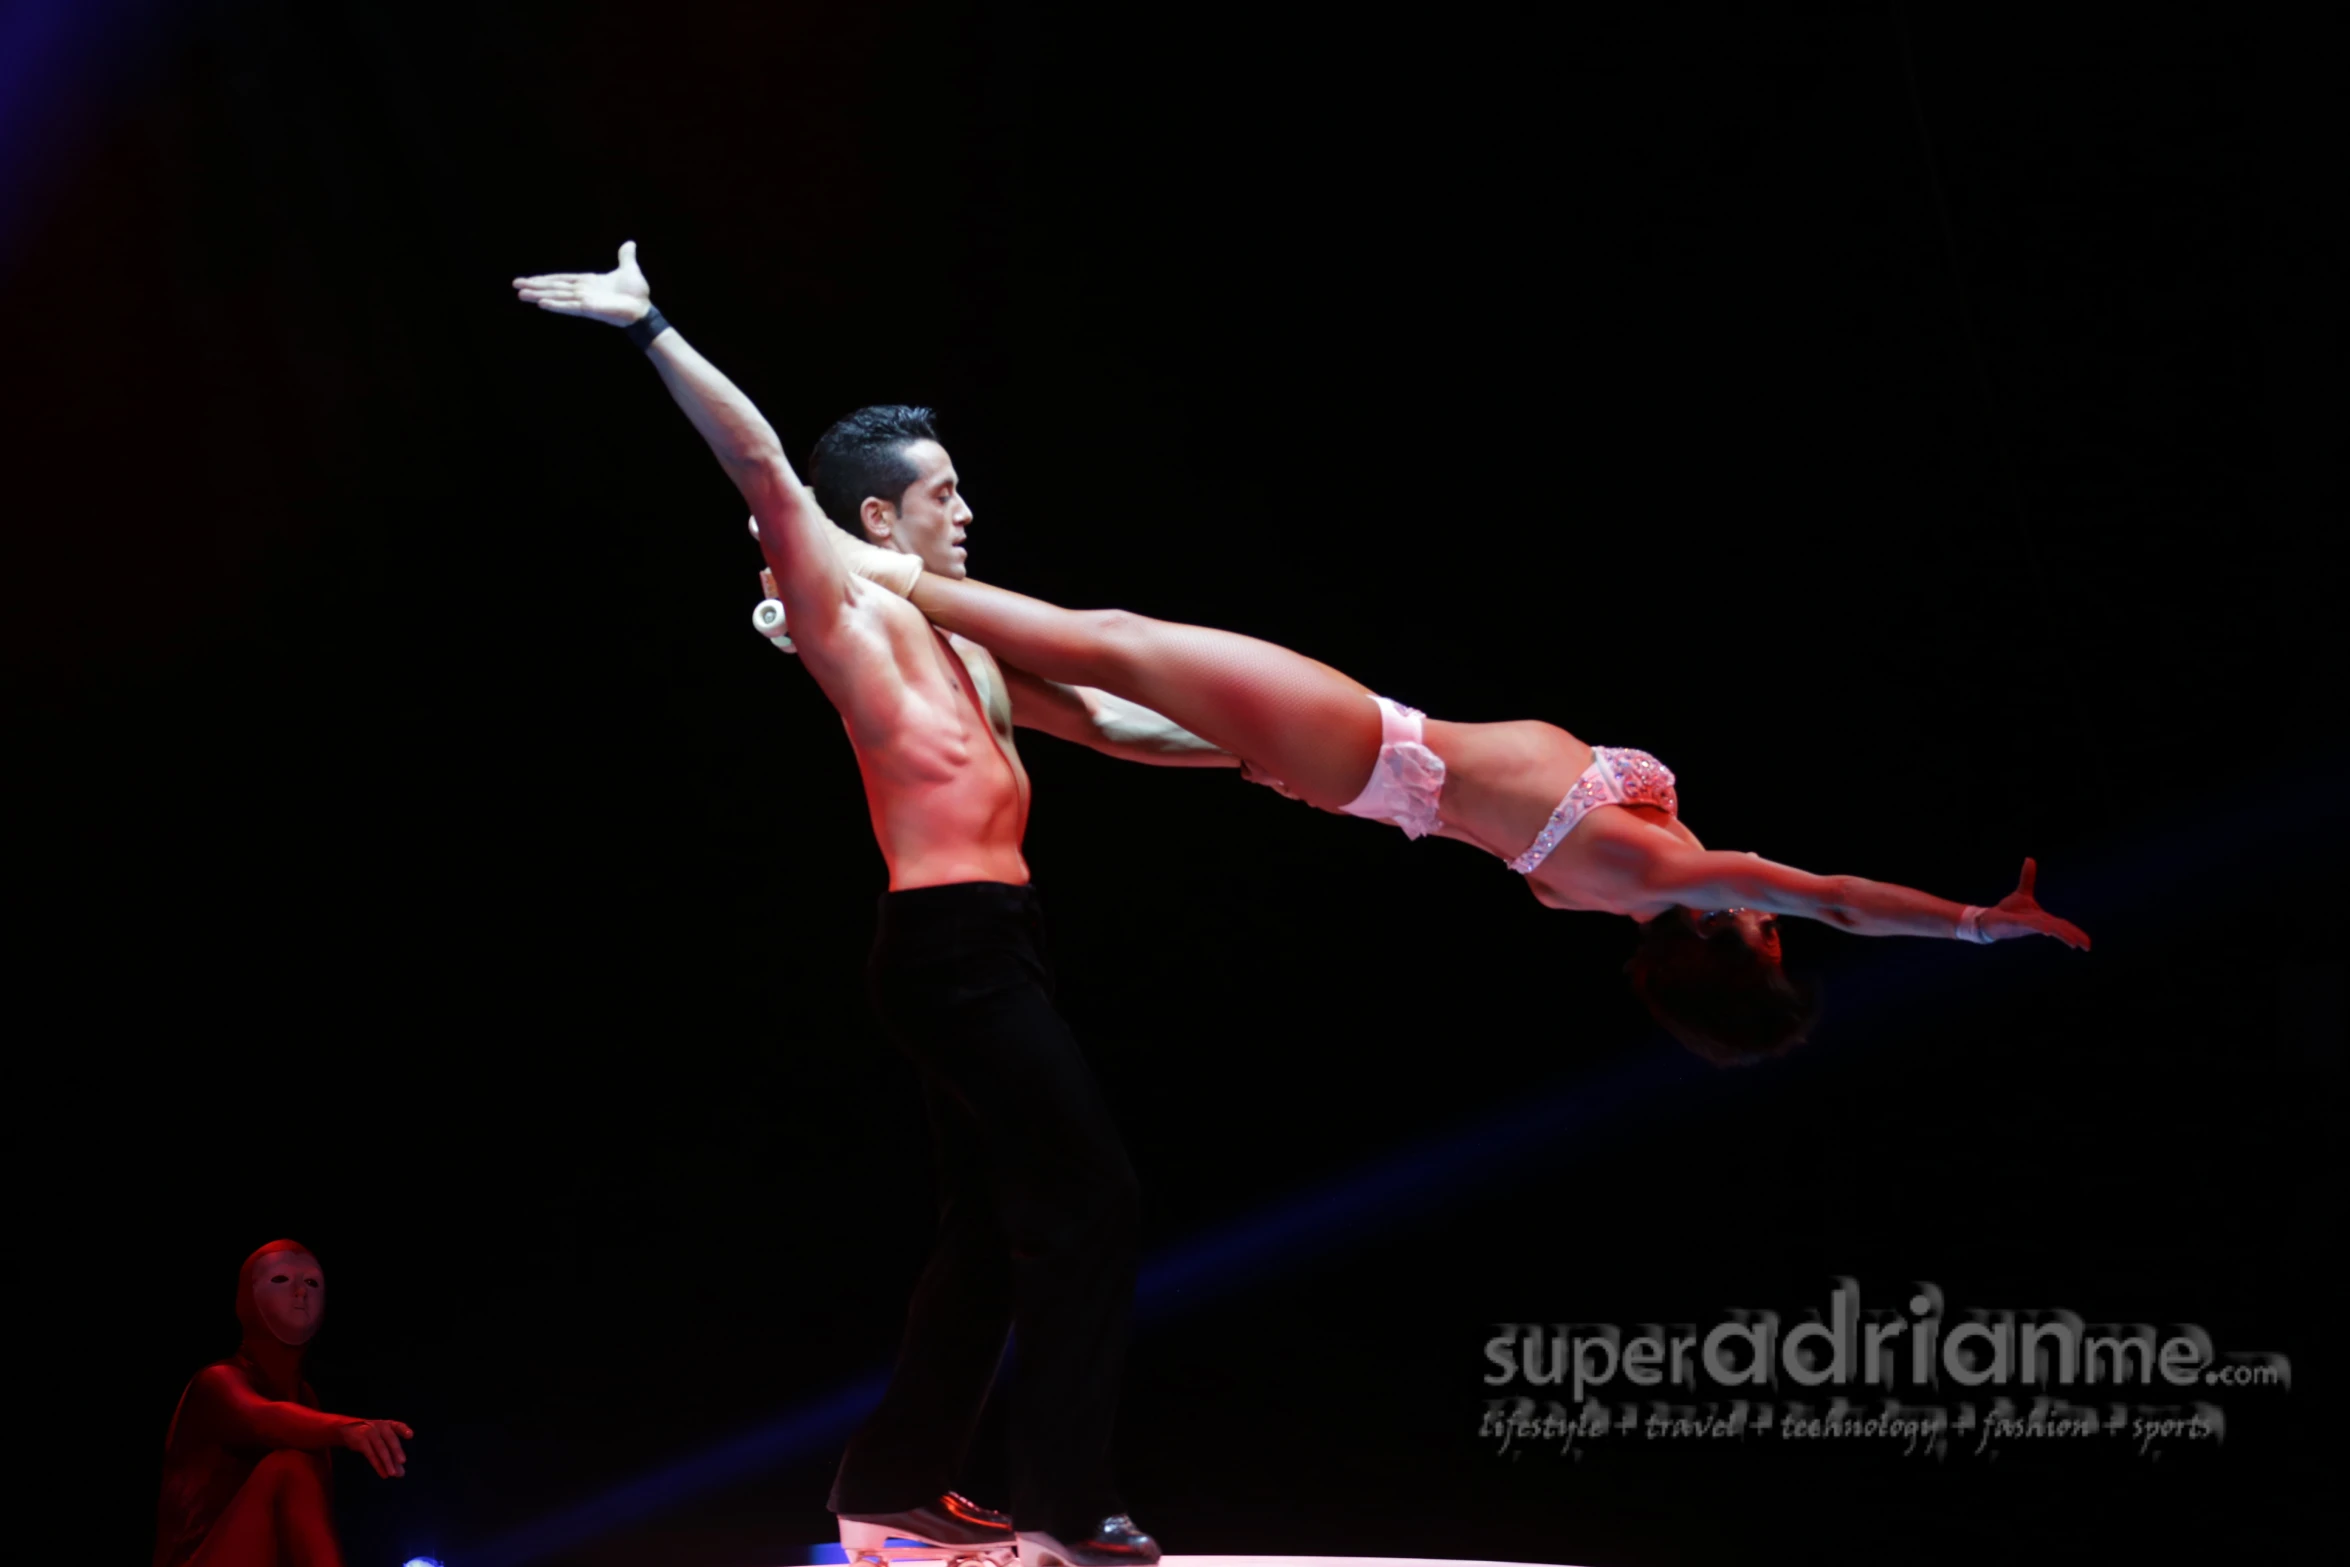 man and woman doing aerial acrobatic tricks in front of audience